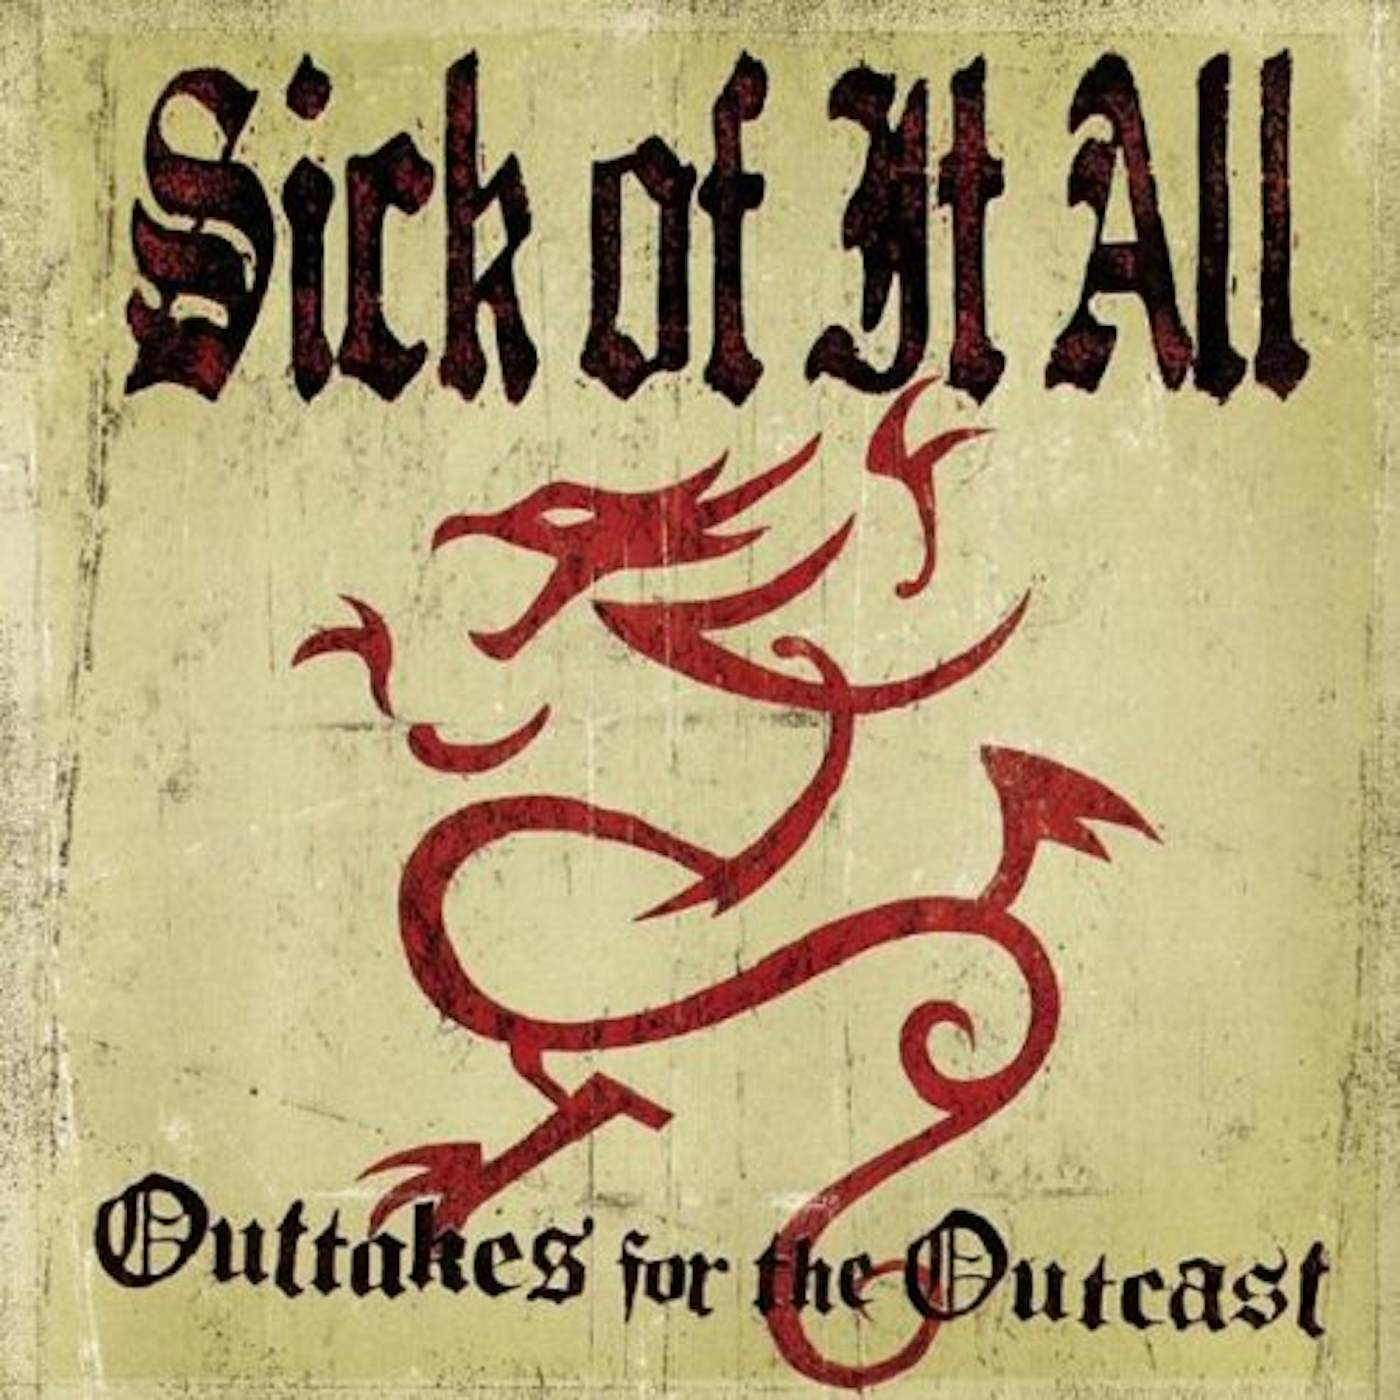 Sick Of It All OUT-TAKES FOR OUTCASTS CD